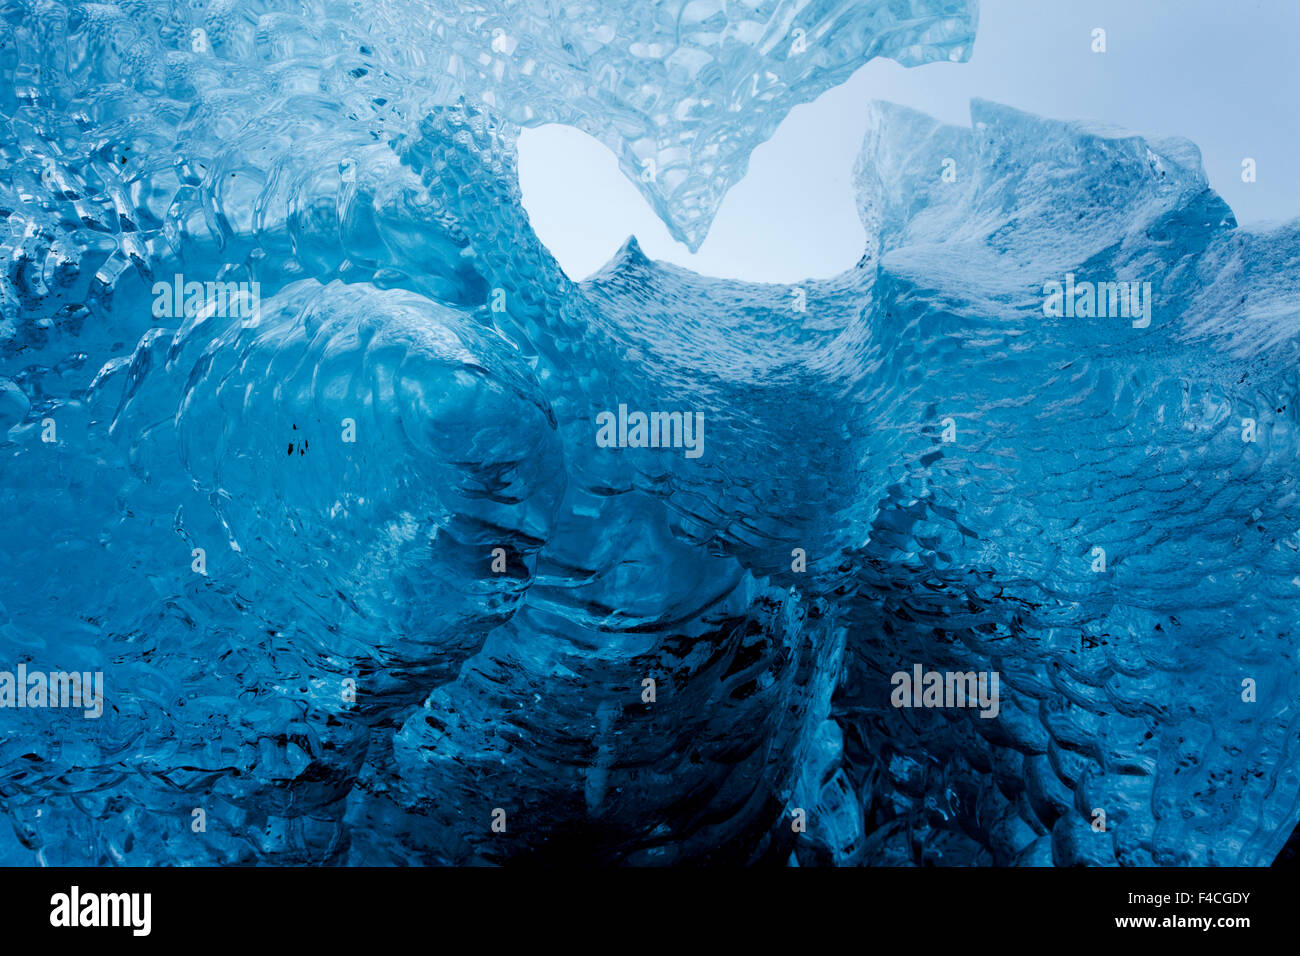 Antarctica, Cuverville Island, Close-up of scalloped surface of melting iceberg. Stock Photo